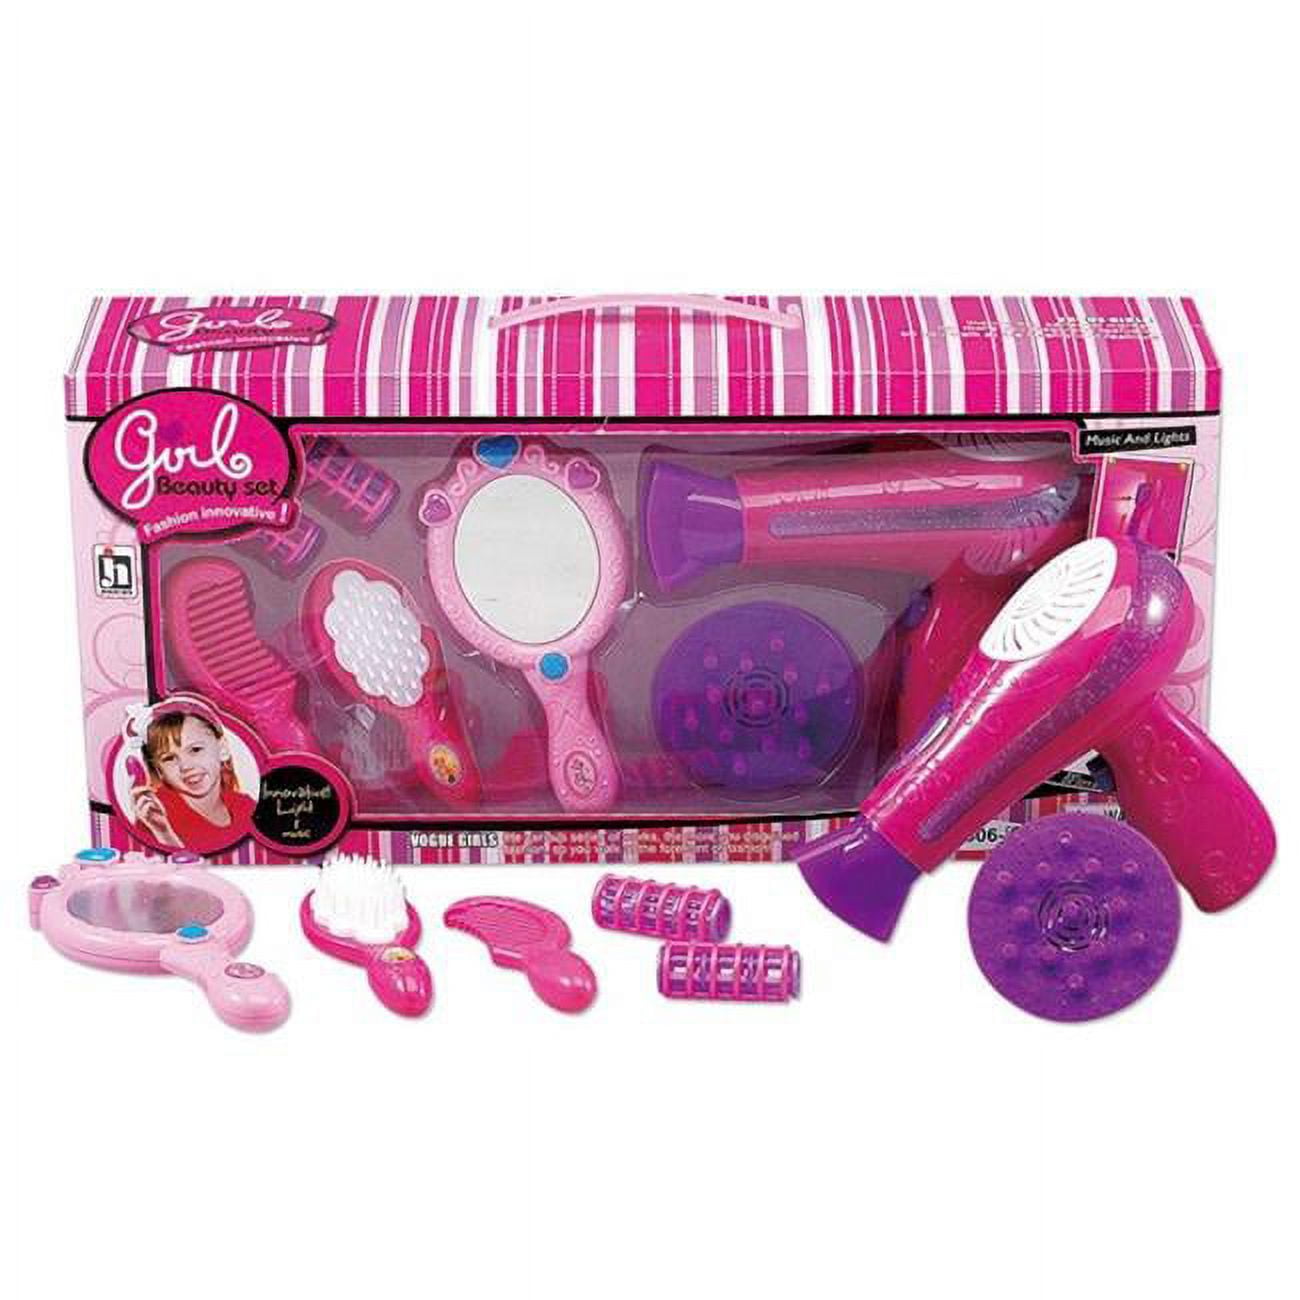 Beauty Salon Fashion Play Set With Hairdryer, Mirror & Accessories